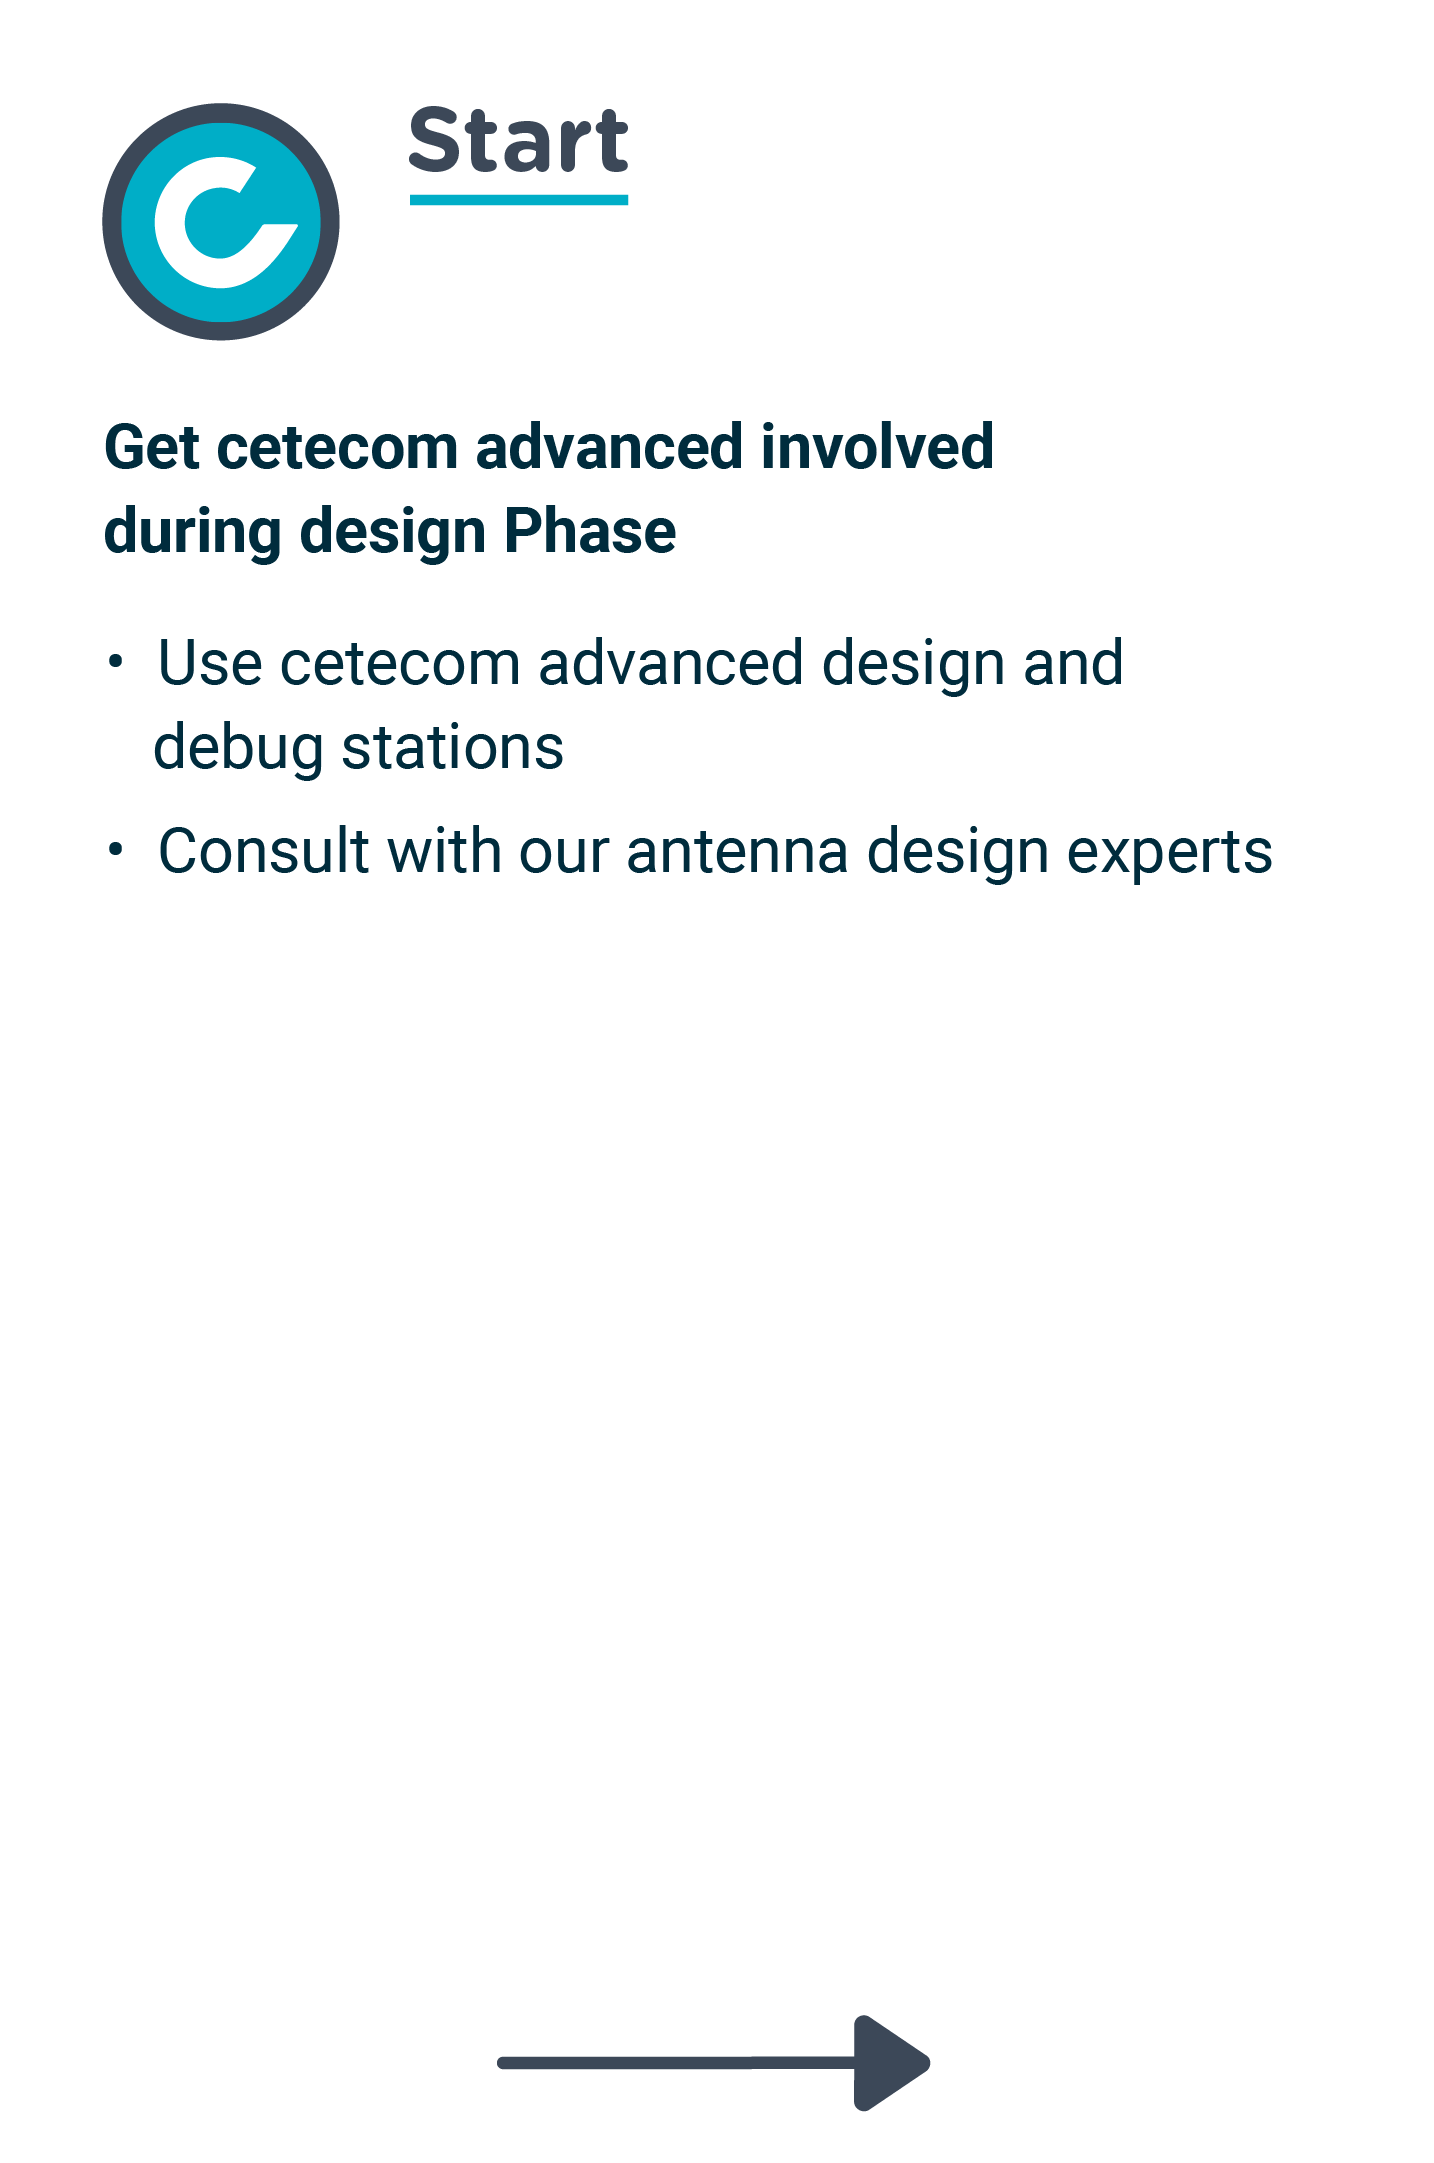 An explanation of the individual steps in the complete process for product development and certification with cetecom advanced, starting with step one: Involving cetecom advanced in the design phase.